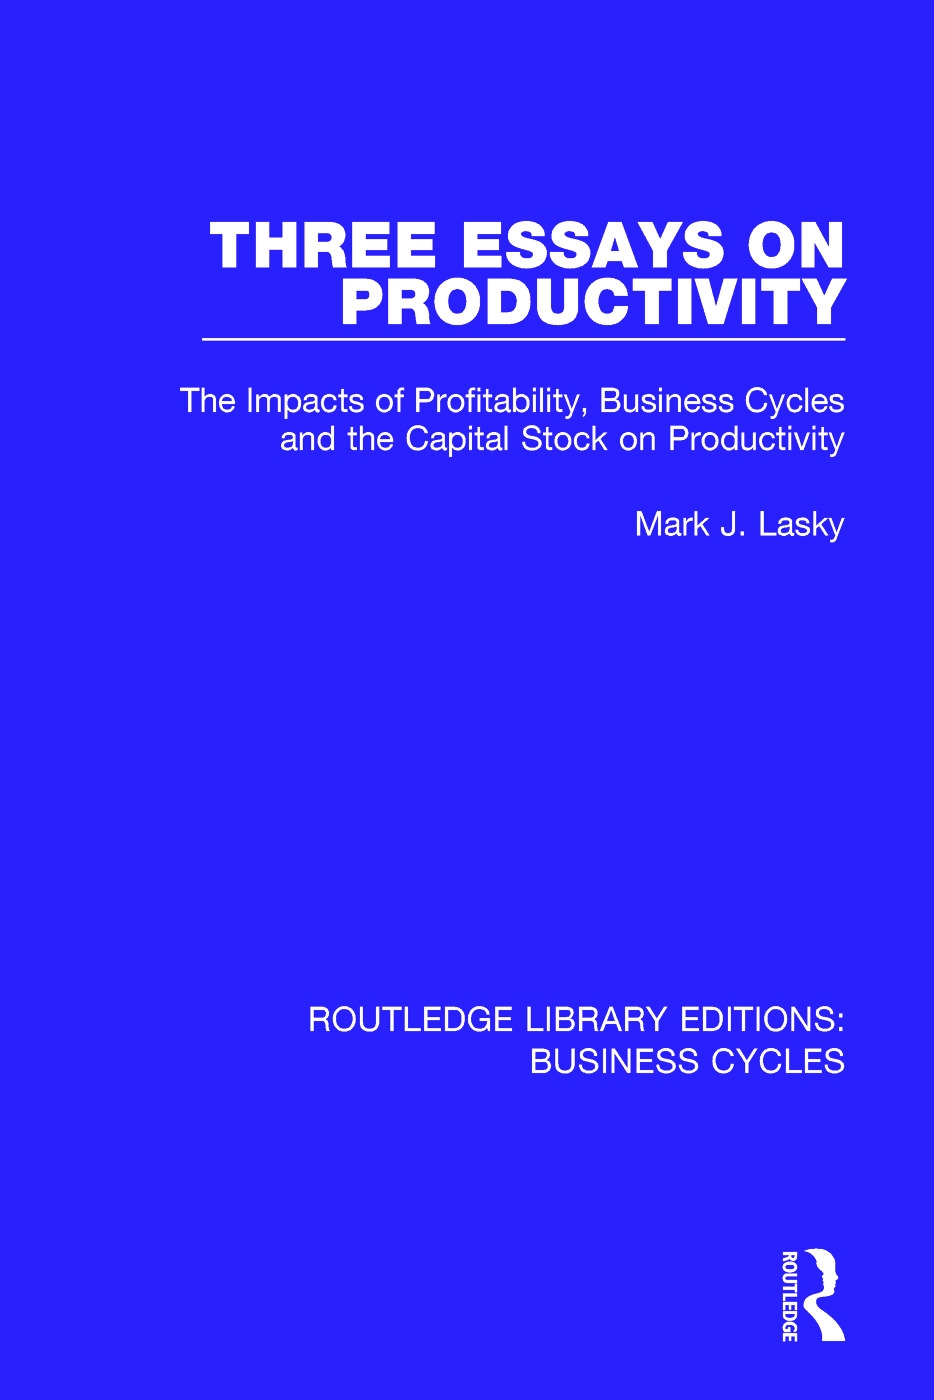 Three Essays on Productivity (Rle: Business Cycles): The Impacts of Profitability, Business Cycles and the Capital Stock on Productivity